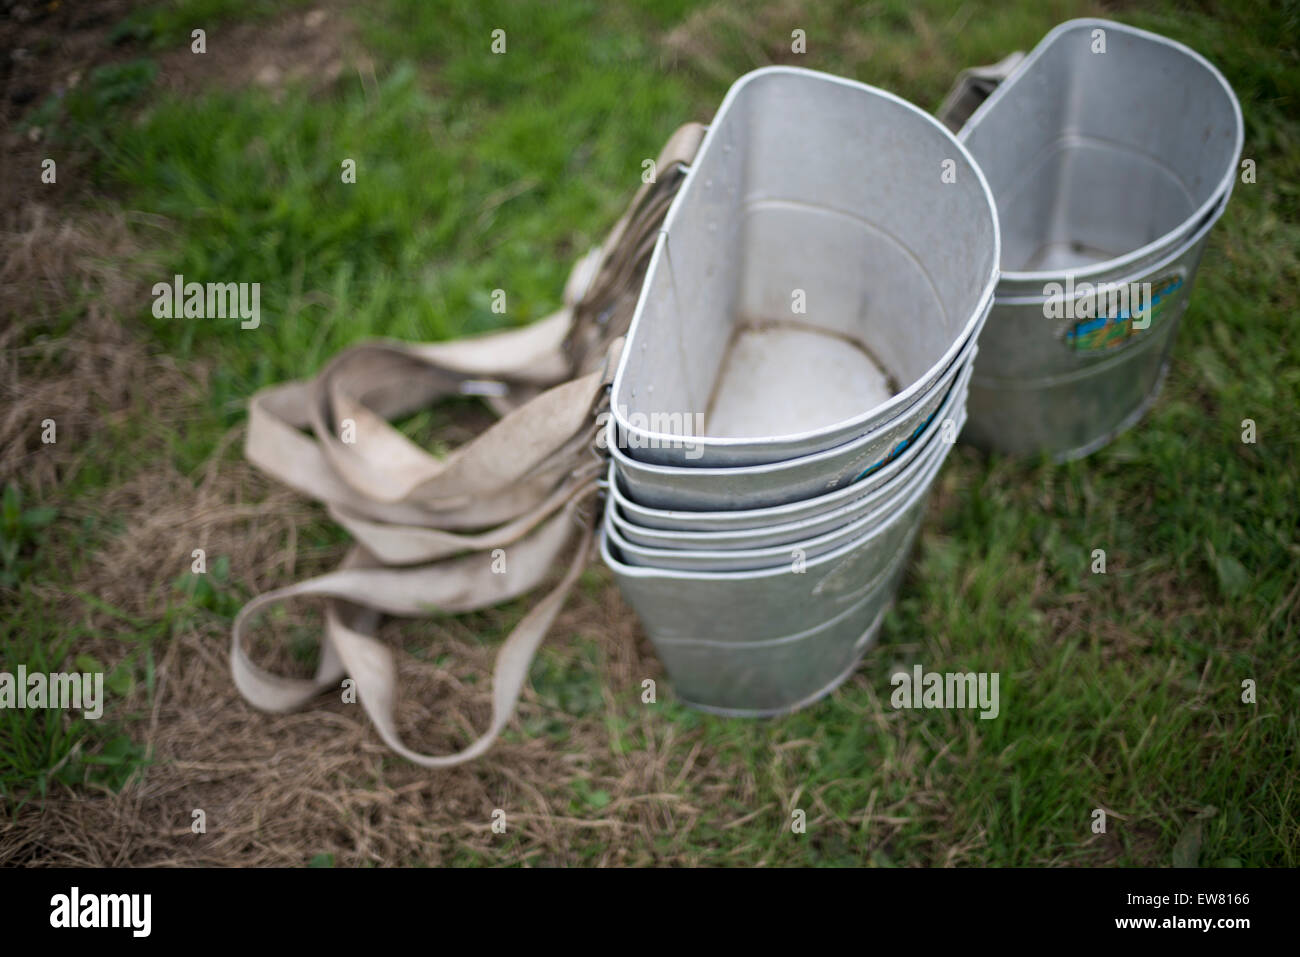 Two pile of metal fruit-picking buckets with straps placed on the ground Stock Photo